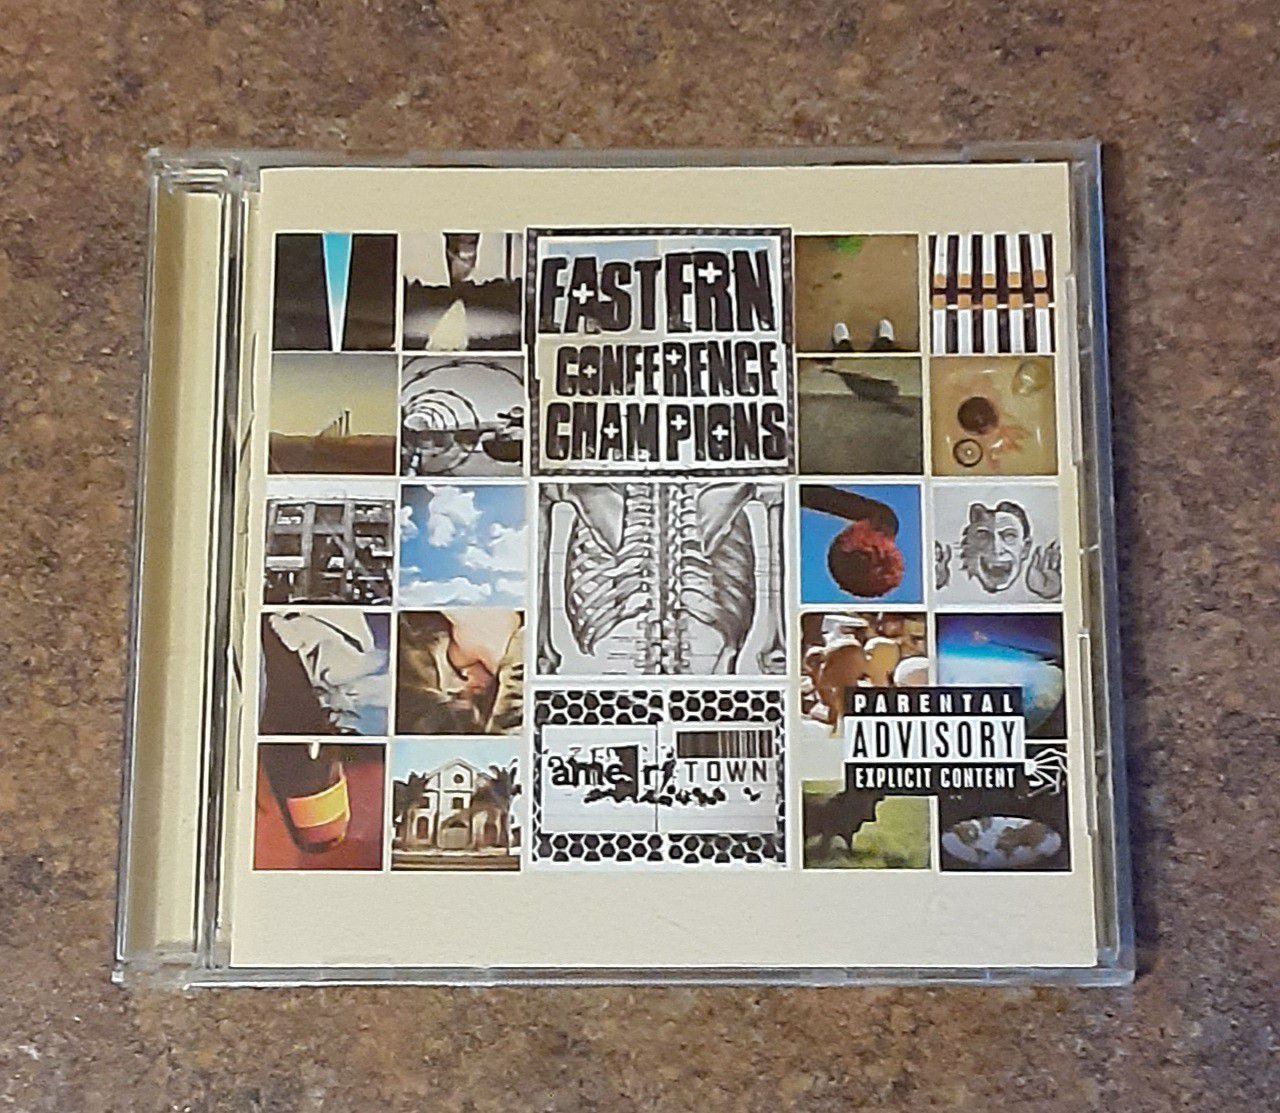 Eastern Conference Champions "Ameritown" Compact Disc Music CD